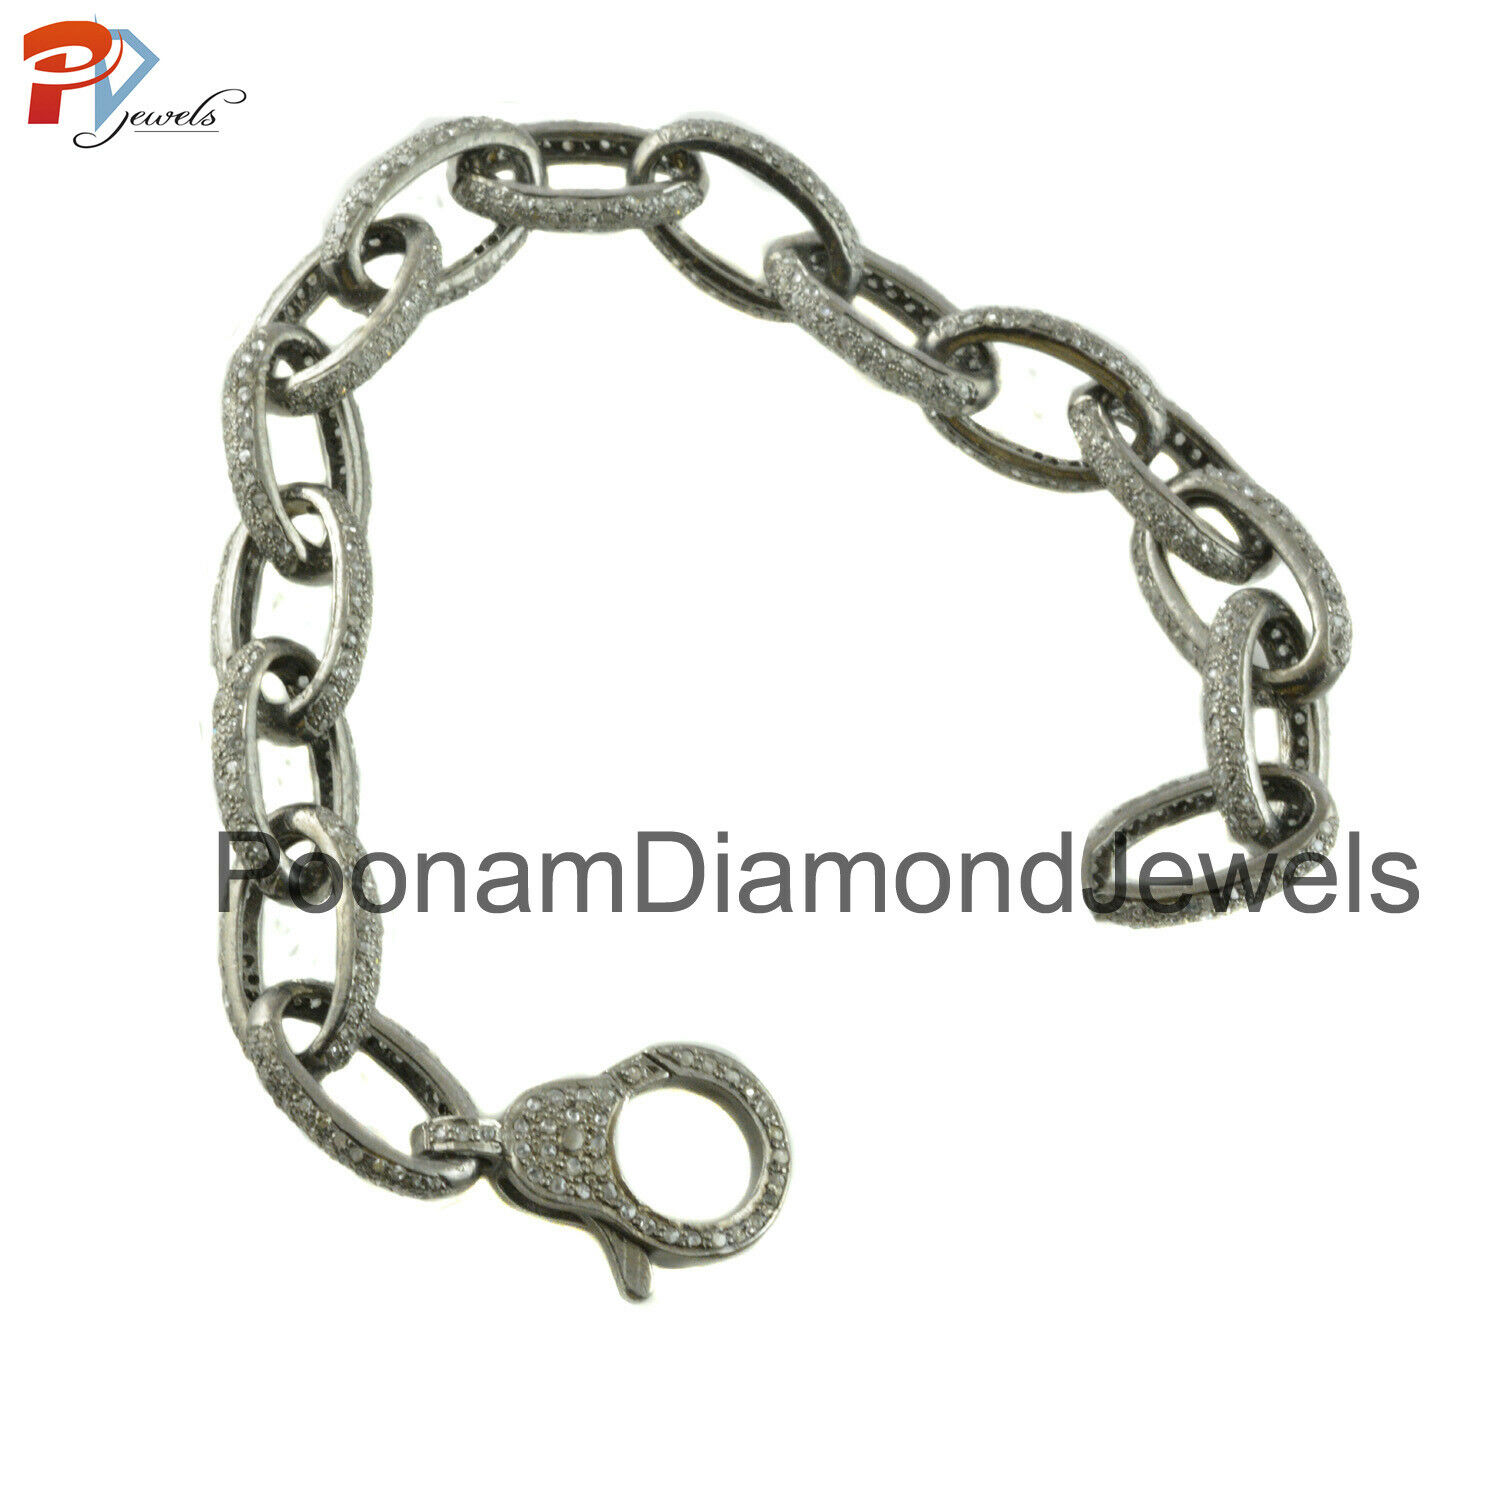 Genuine Pave Diamond 925 Solid Silver Link Chain Bracelet Lobster Clasp Jewelry